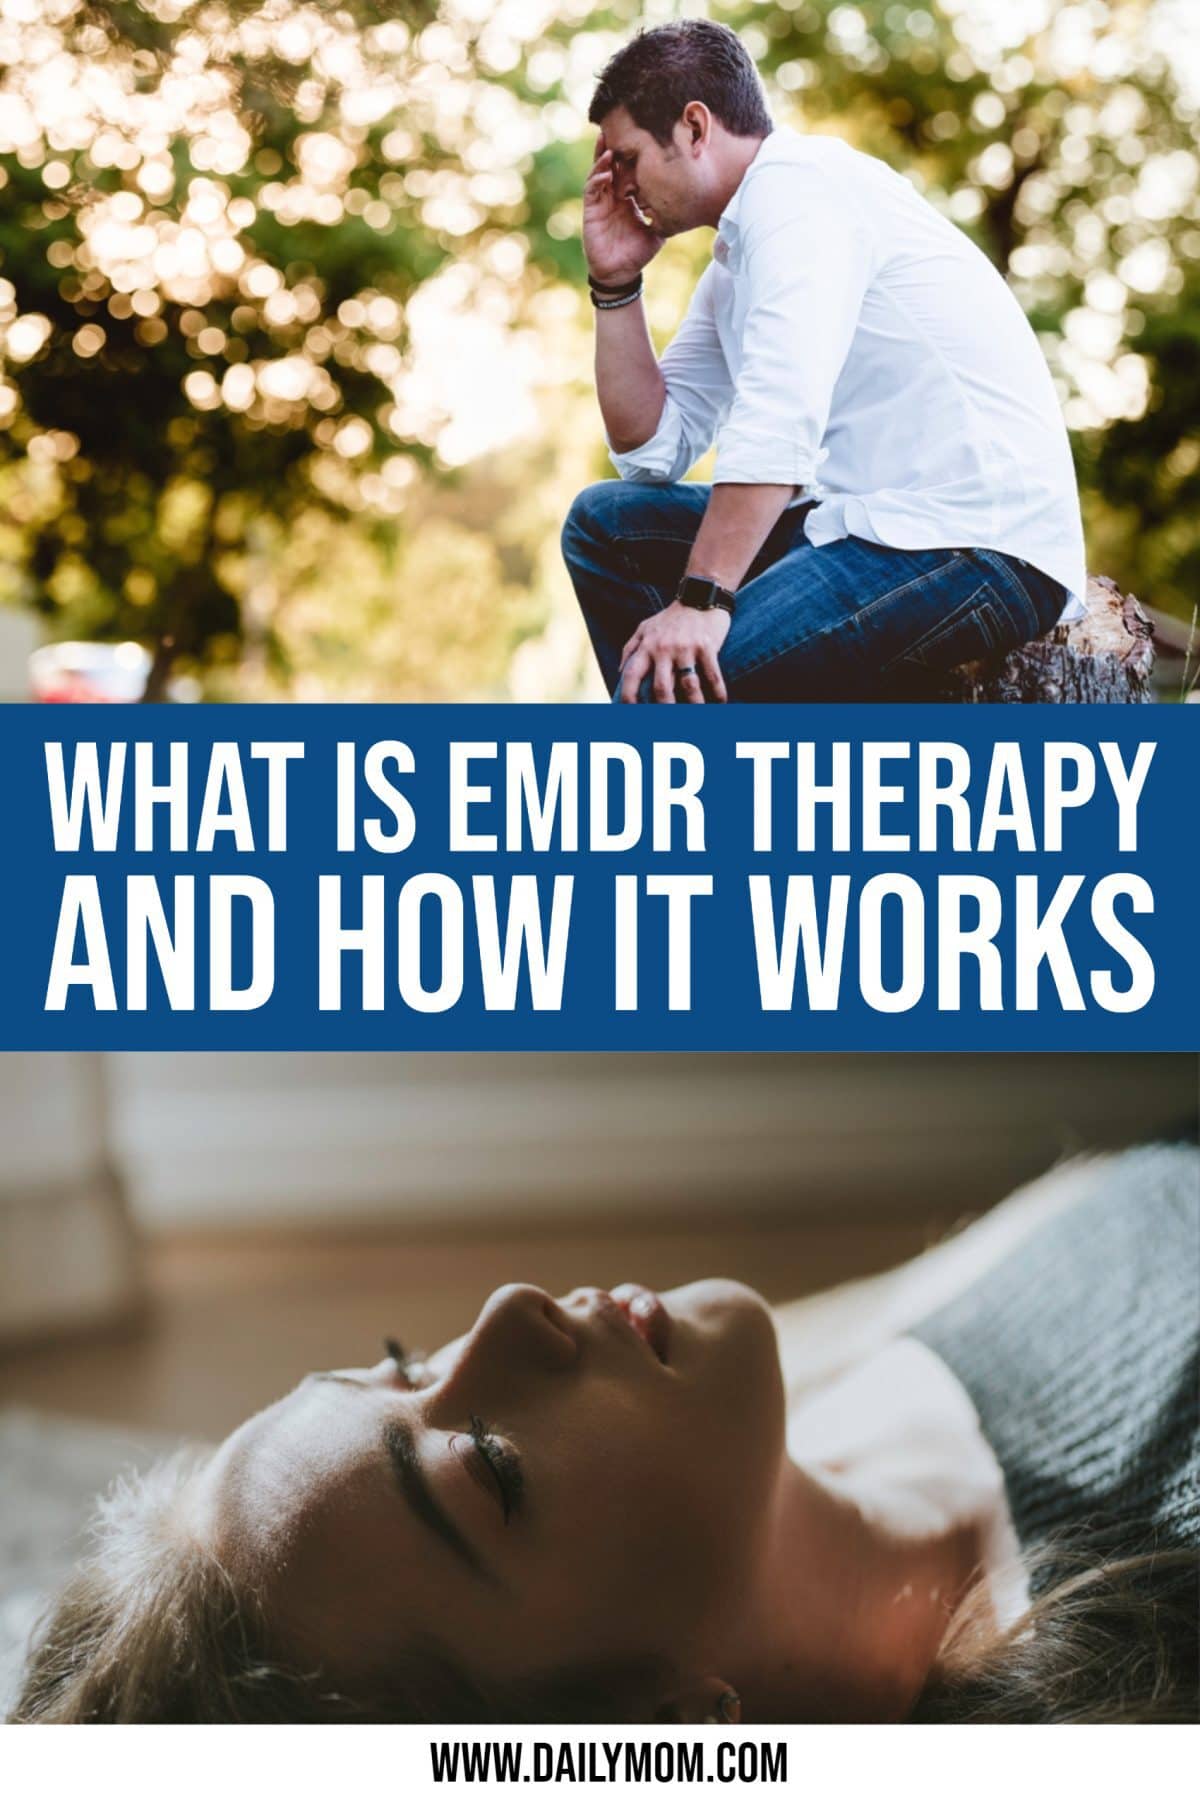 What Is Emdr Therapy?